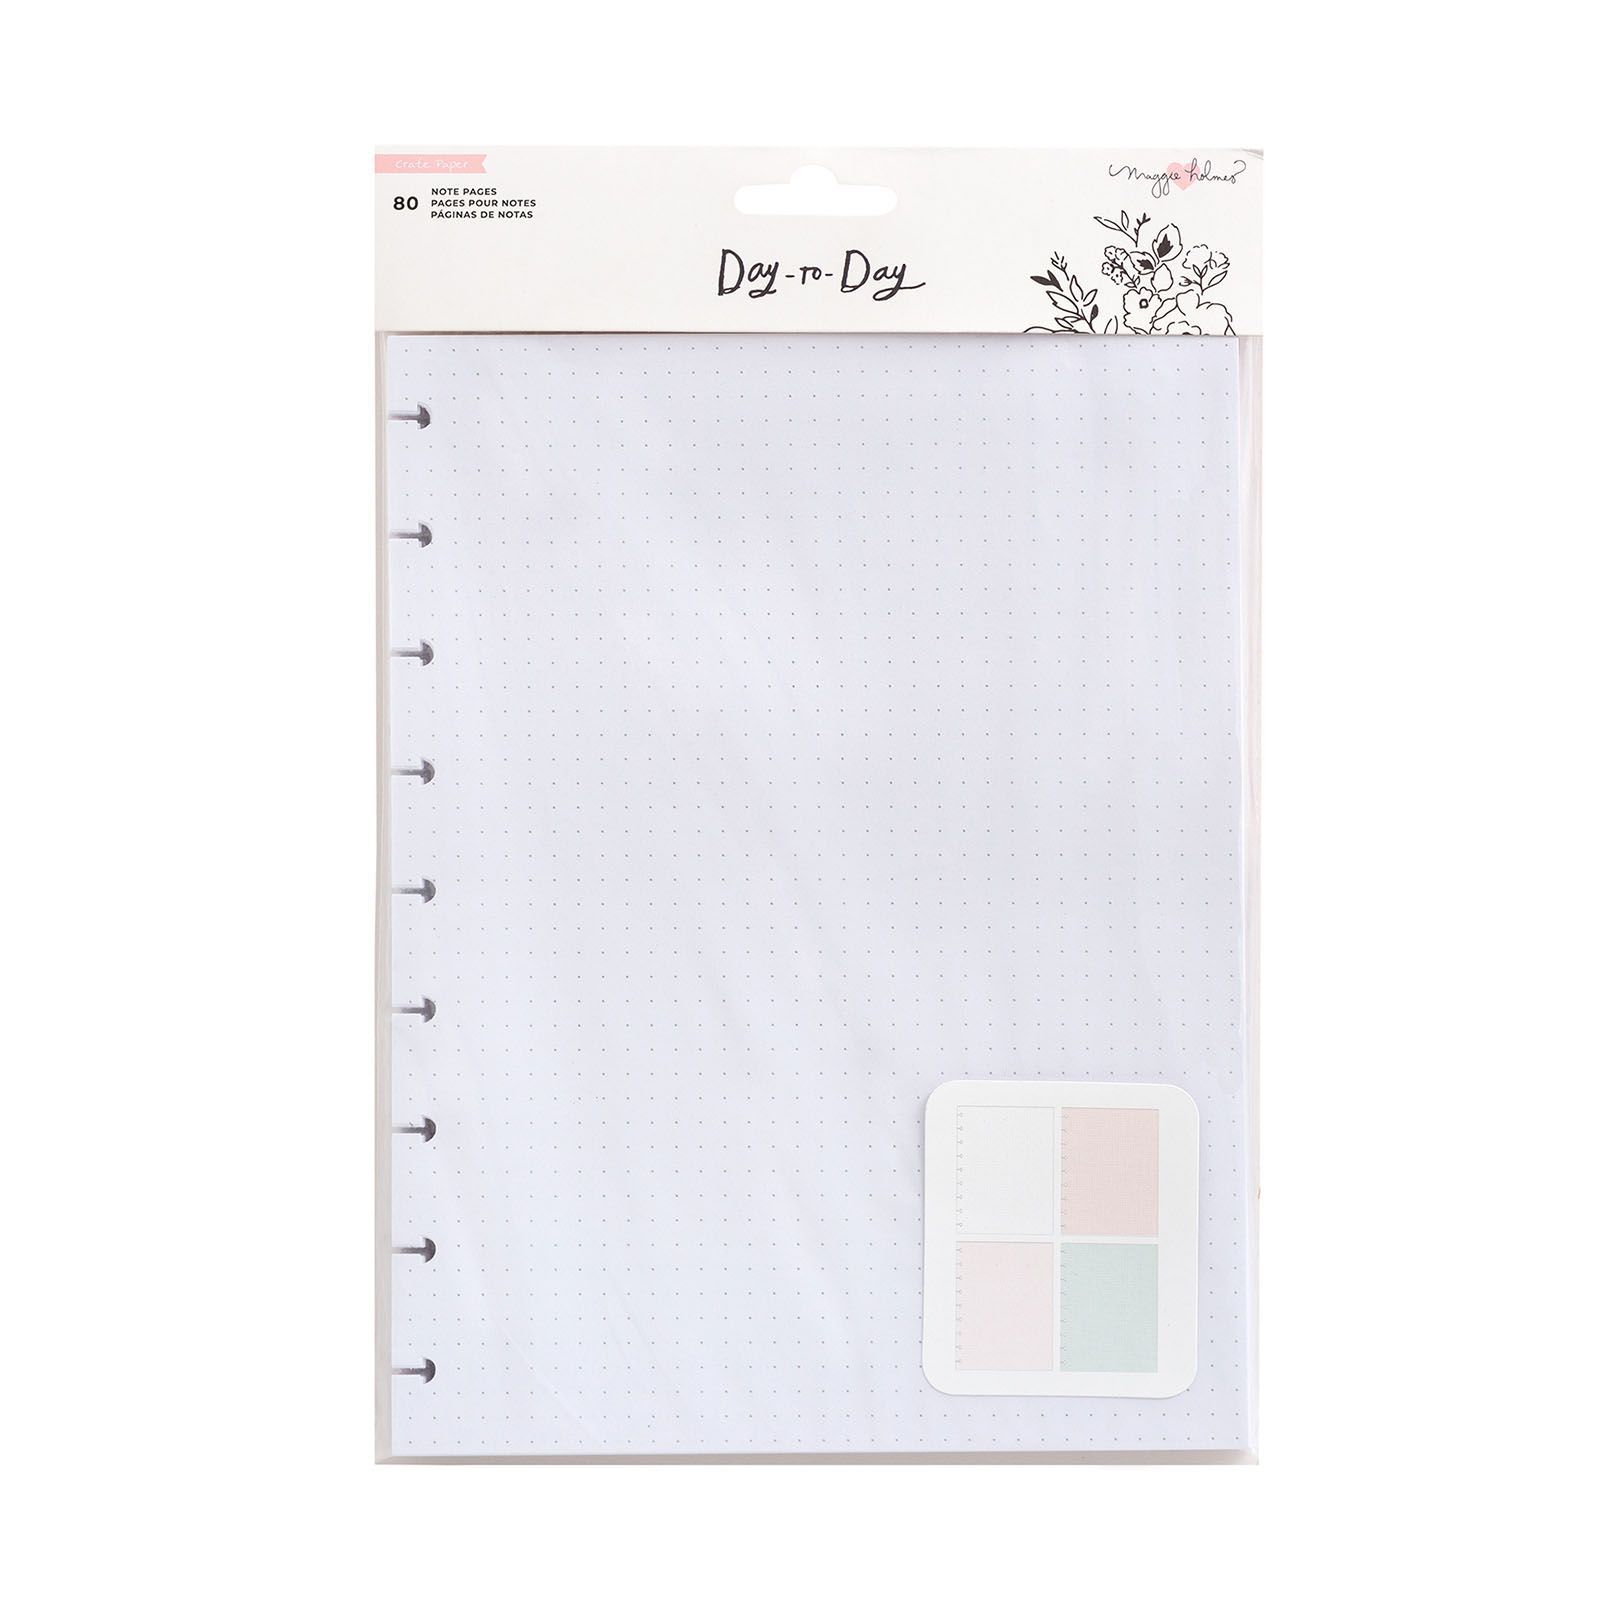 Crate Paper • Day-to-Day disc planner Note pages